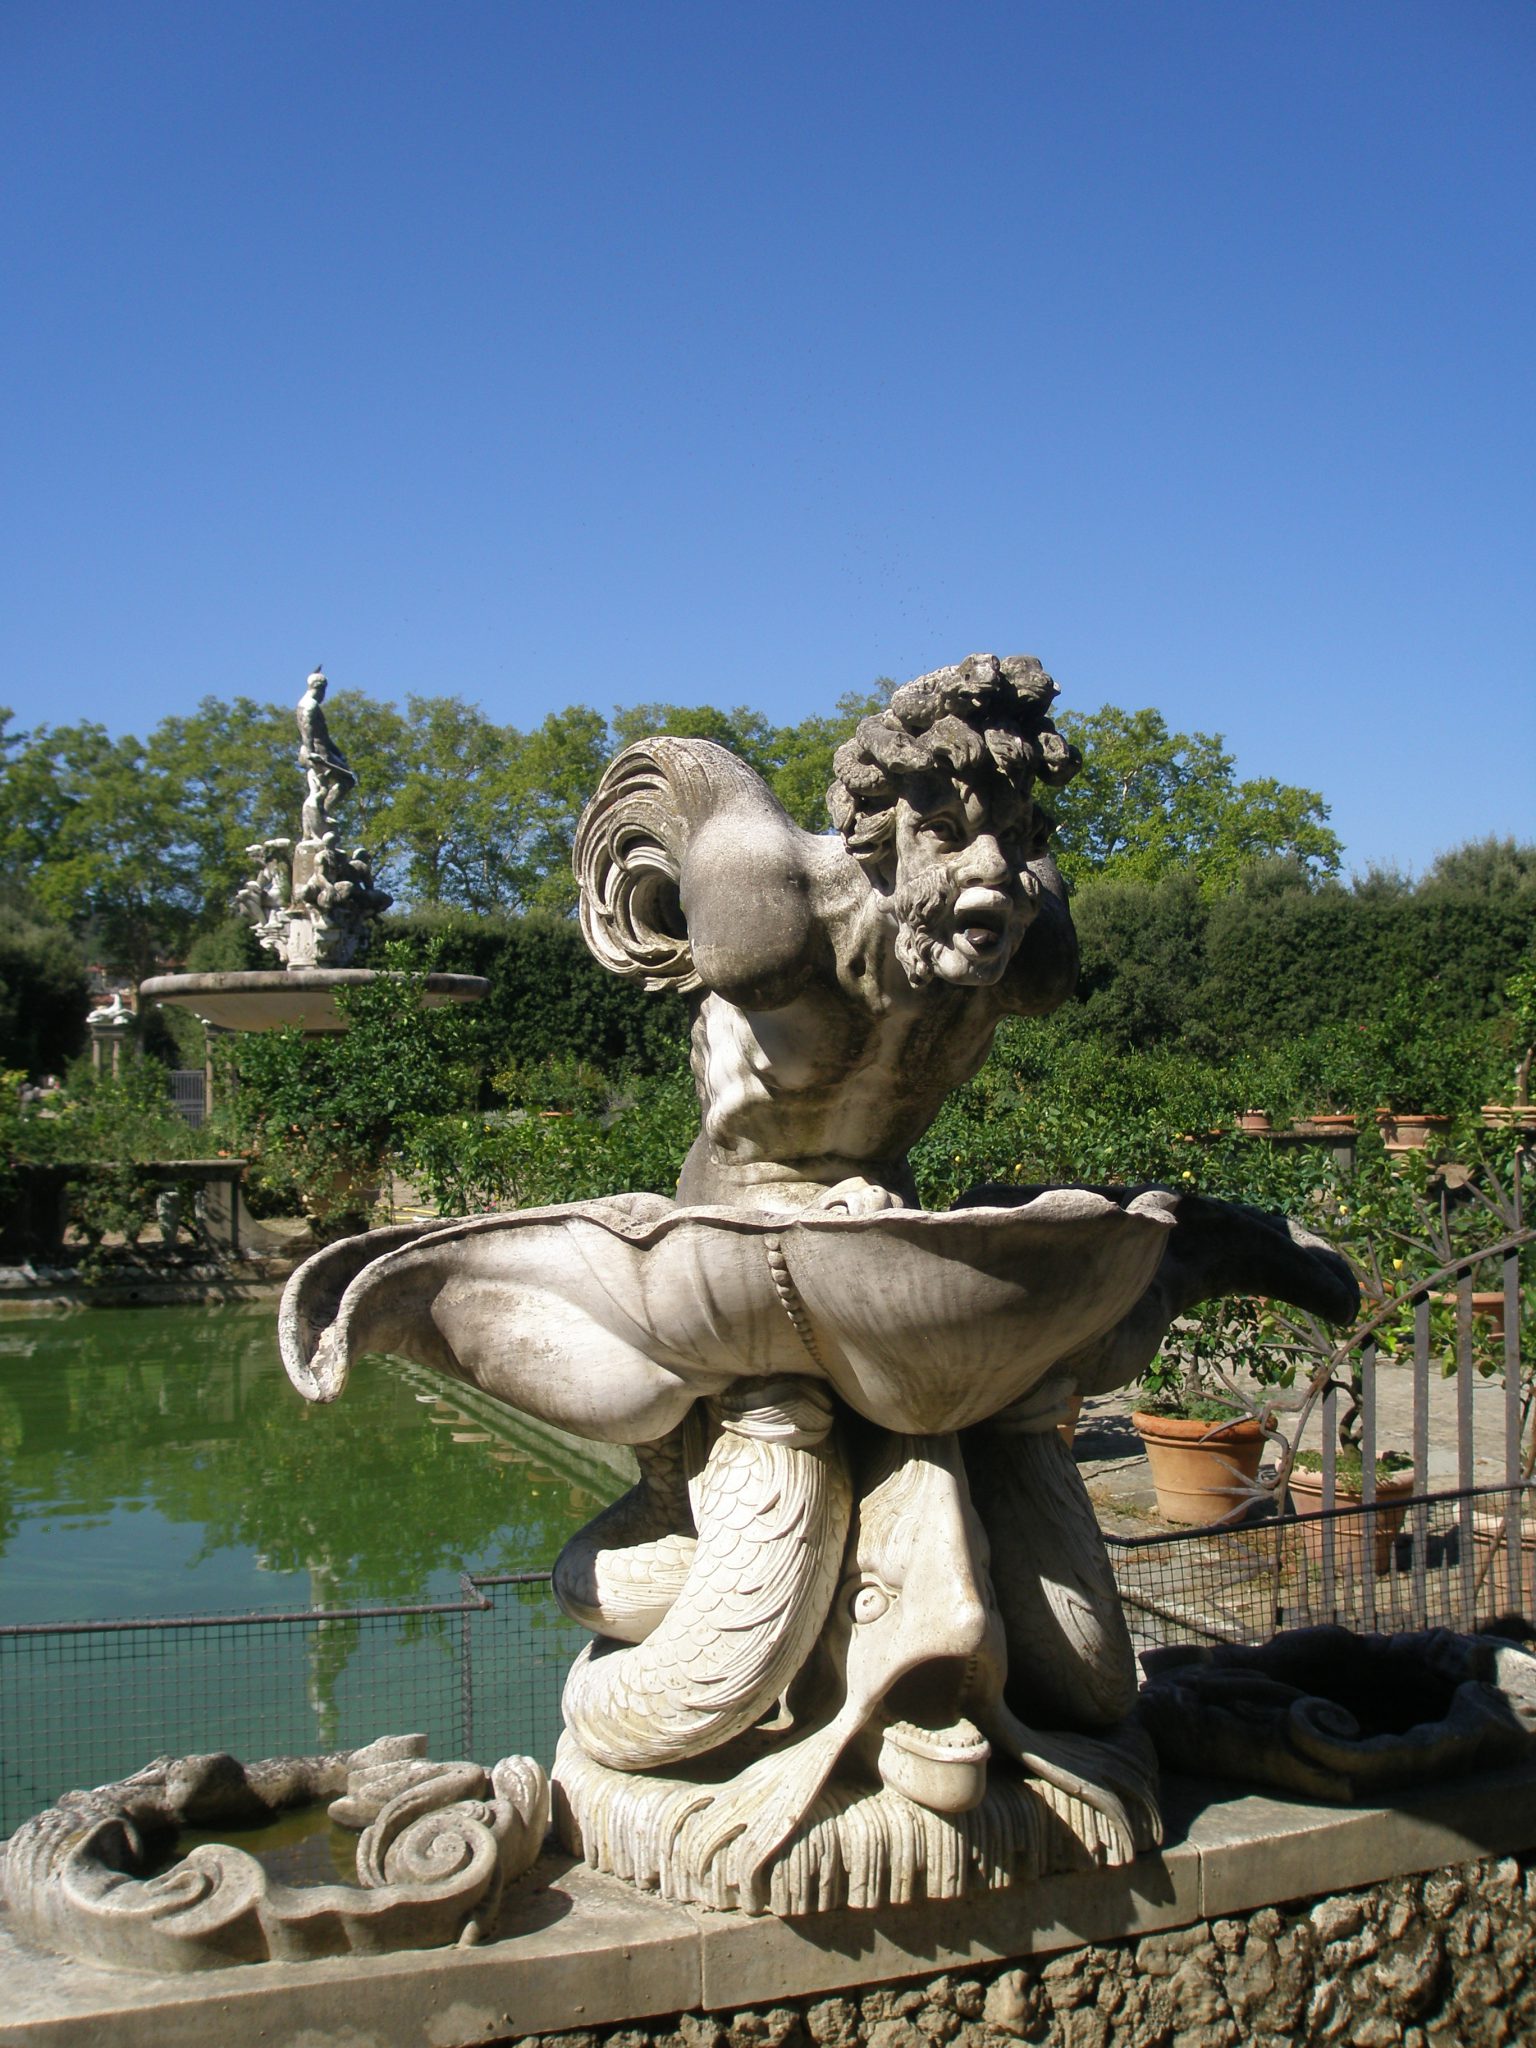 My photo of the original Oceanus Fountain (seen looming in the background), taken in Florence's Boboli Gardens during my visit on Sunday, Sept. 9, 2012.